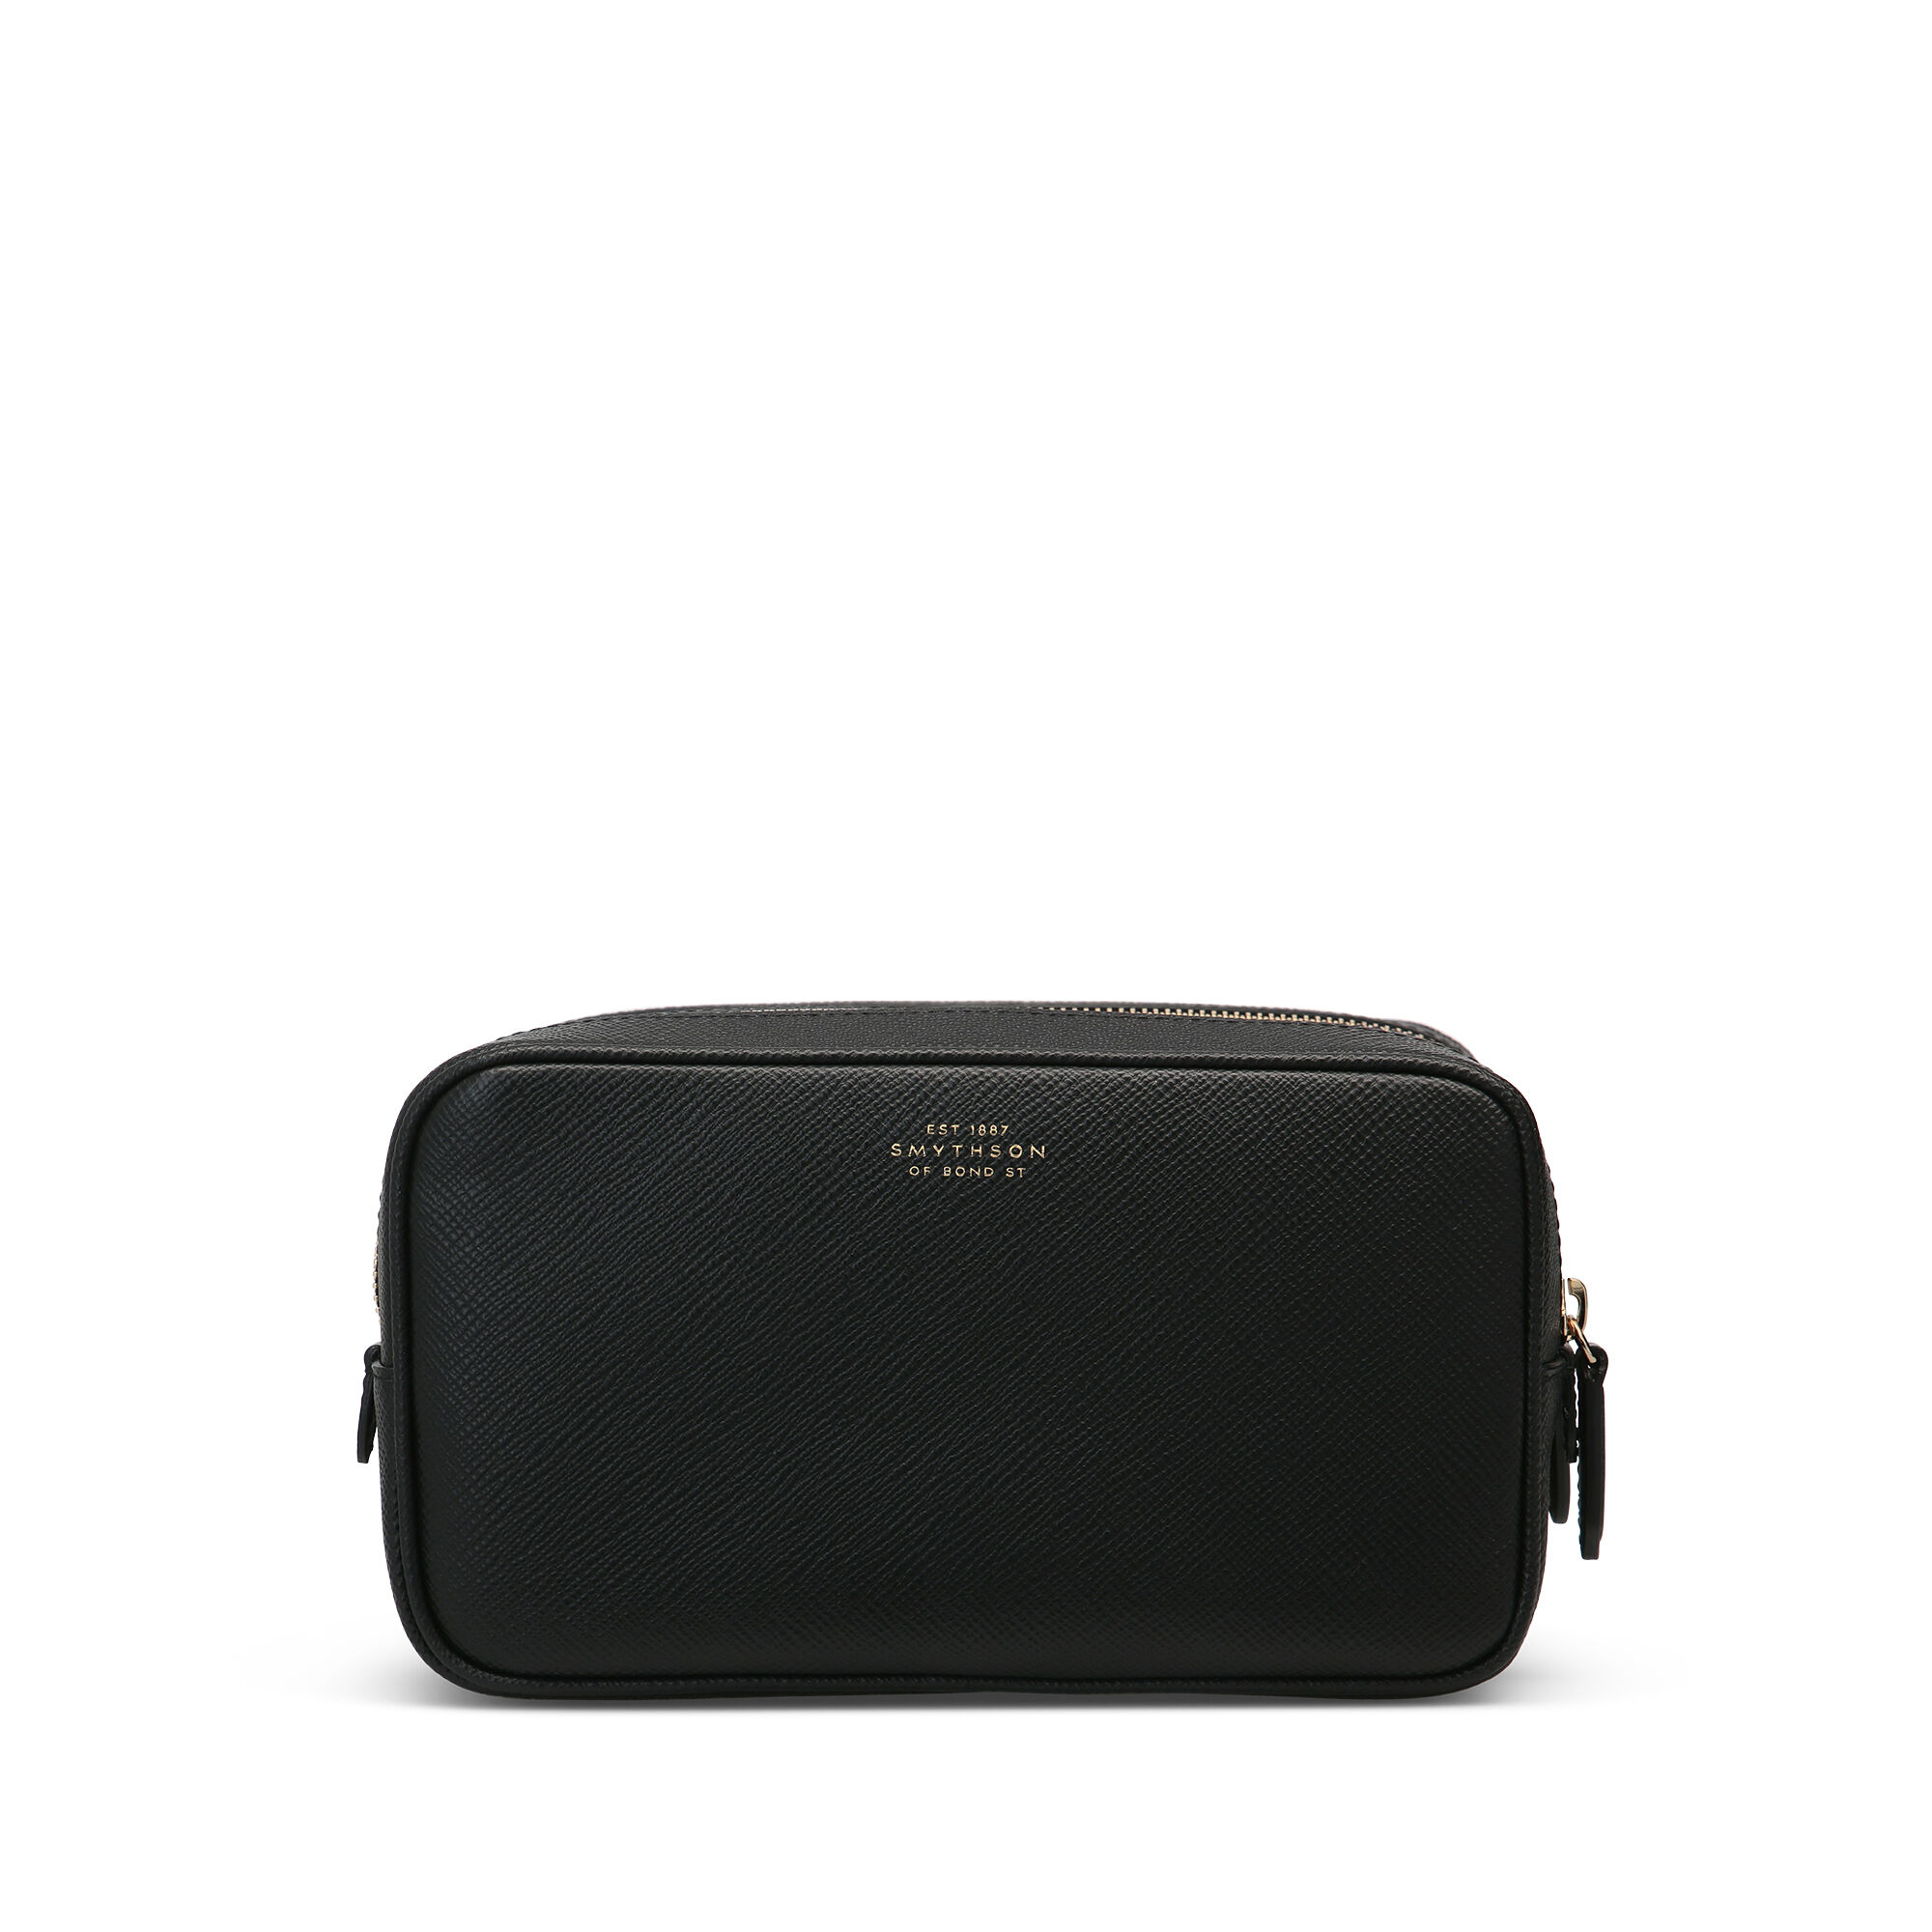 Women's Leather Costmetic Cases and Washbags | Smythson